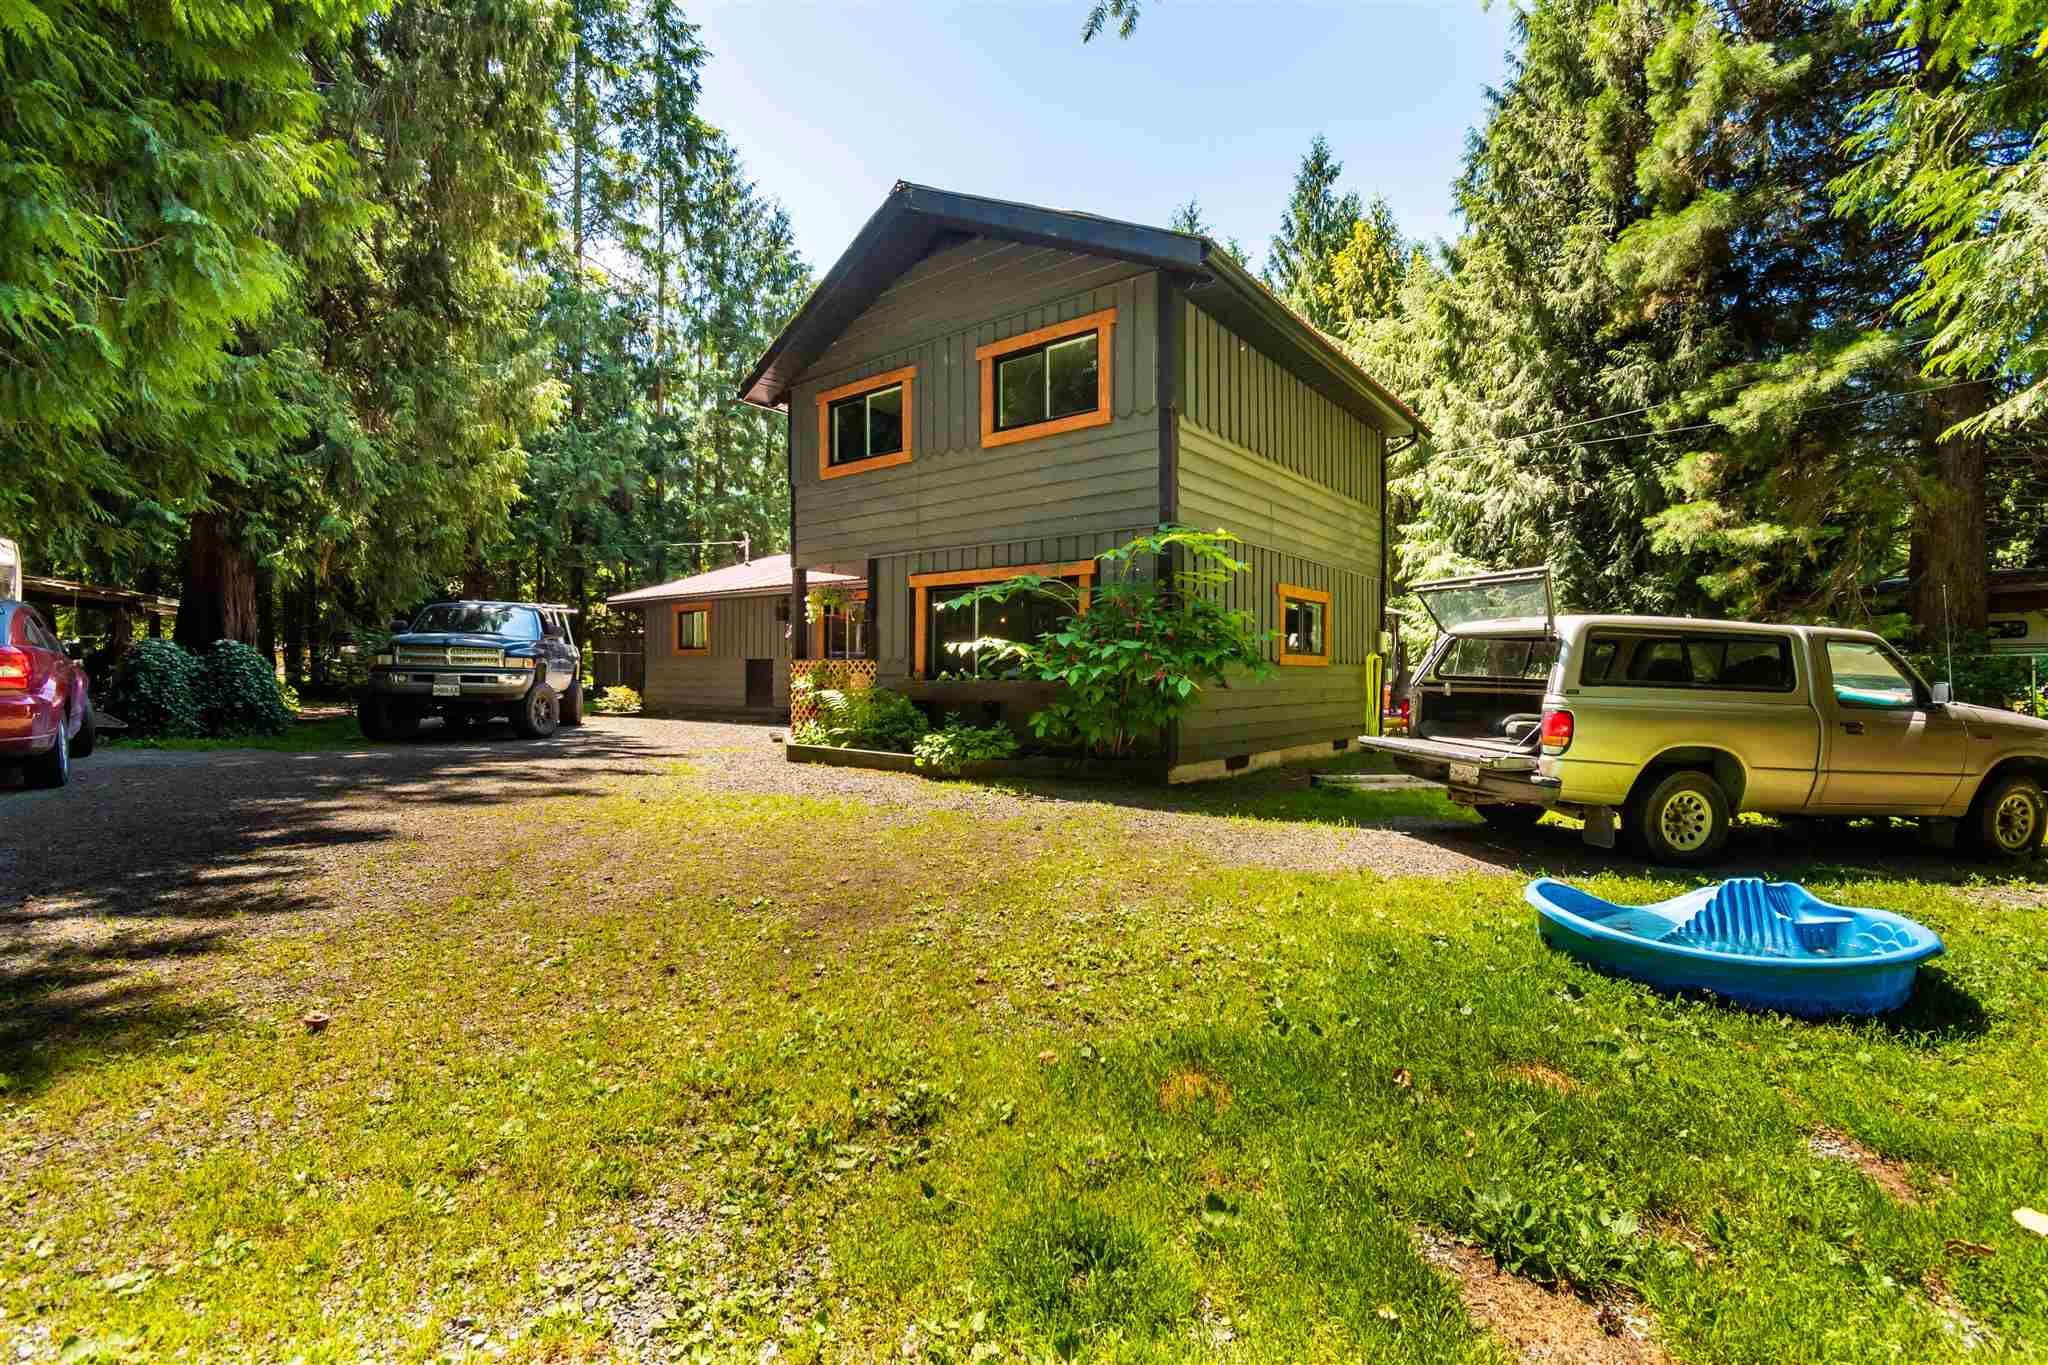 Main Photo: 49280 BELL ACRES ROAD in : Chilliwack River Valley House for sale : MLS®# R2595742